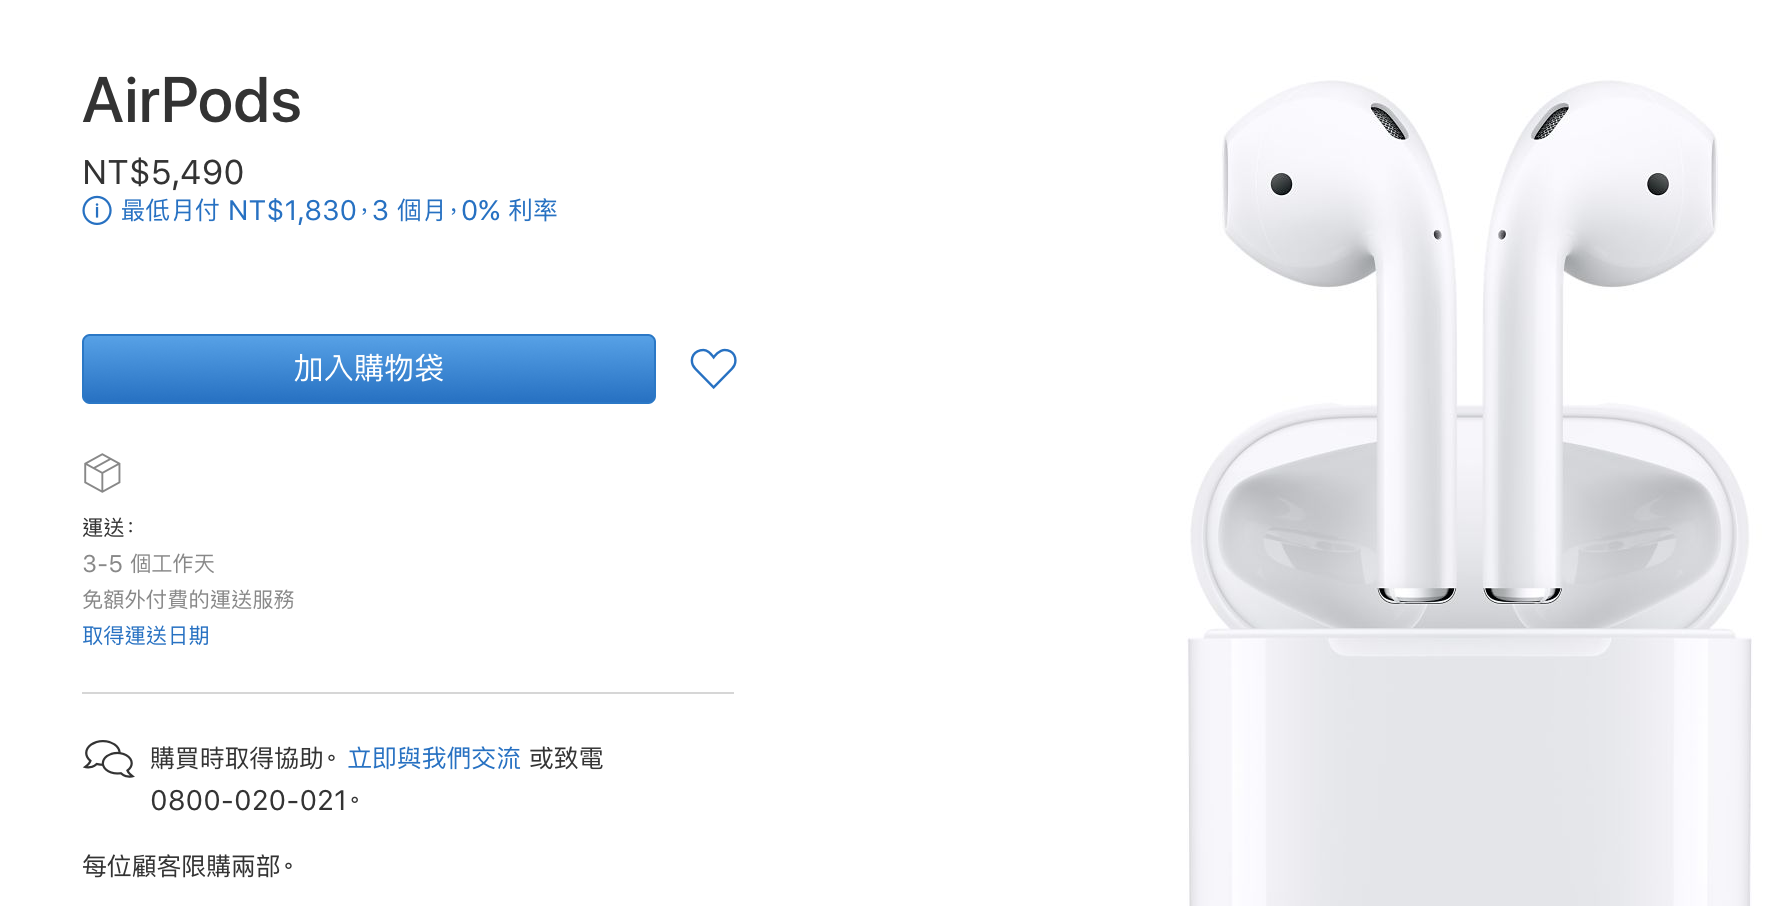 airpods shippment 3 5 business day 01